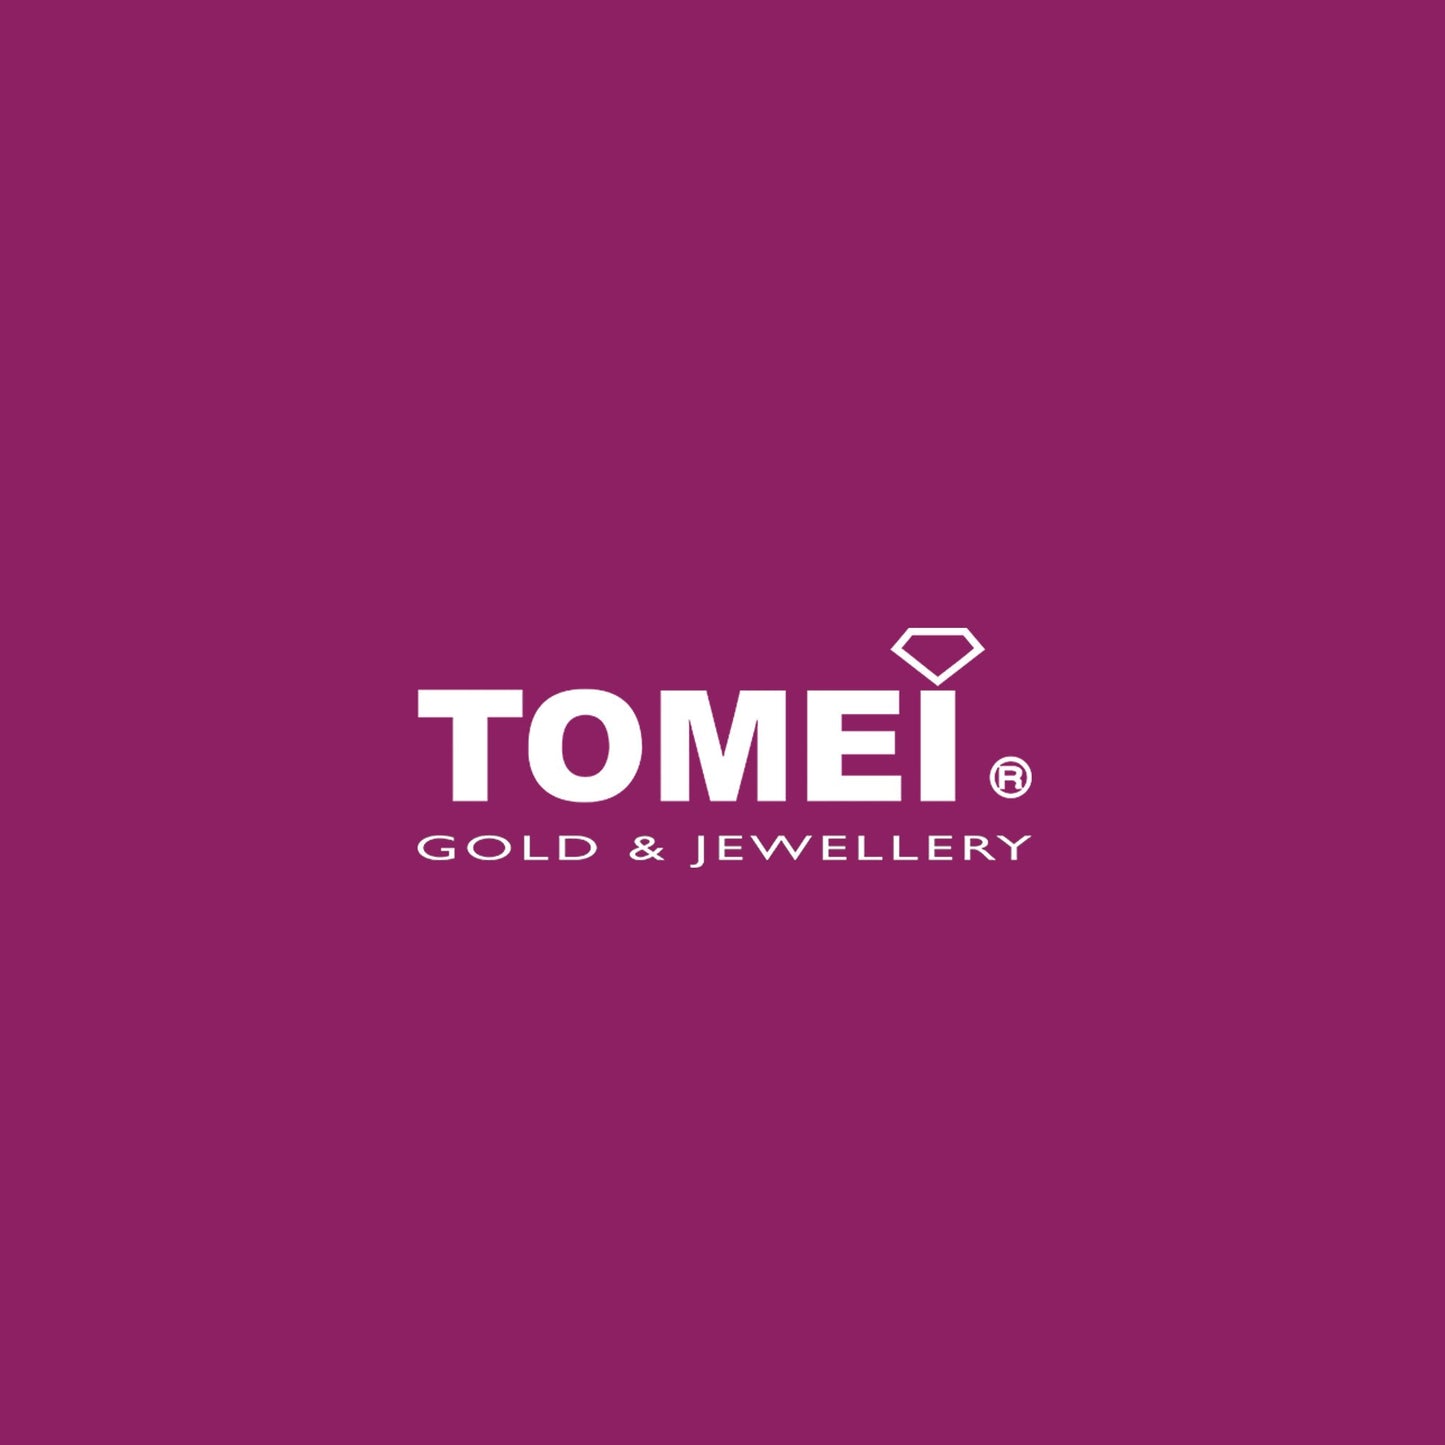 TOMEI Sturdy Linked Ring, Yellow Gold 916